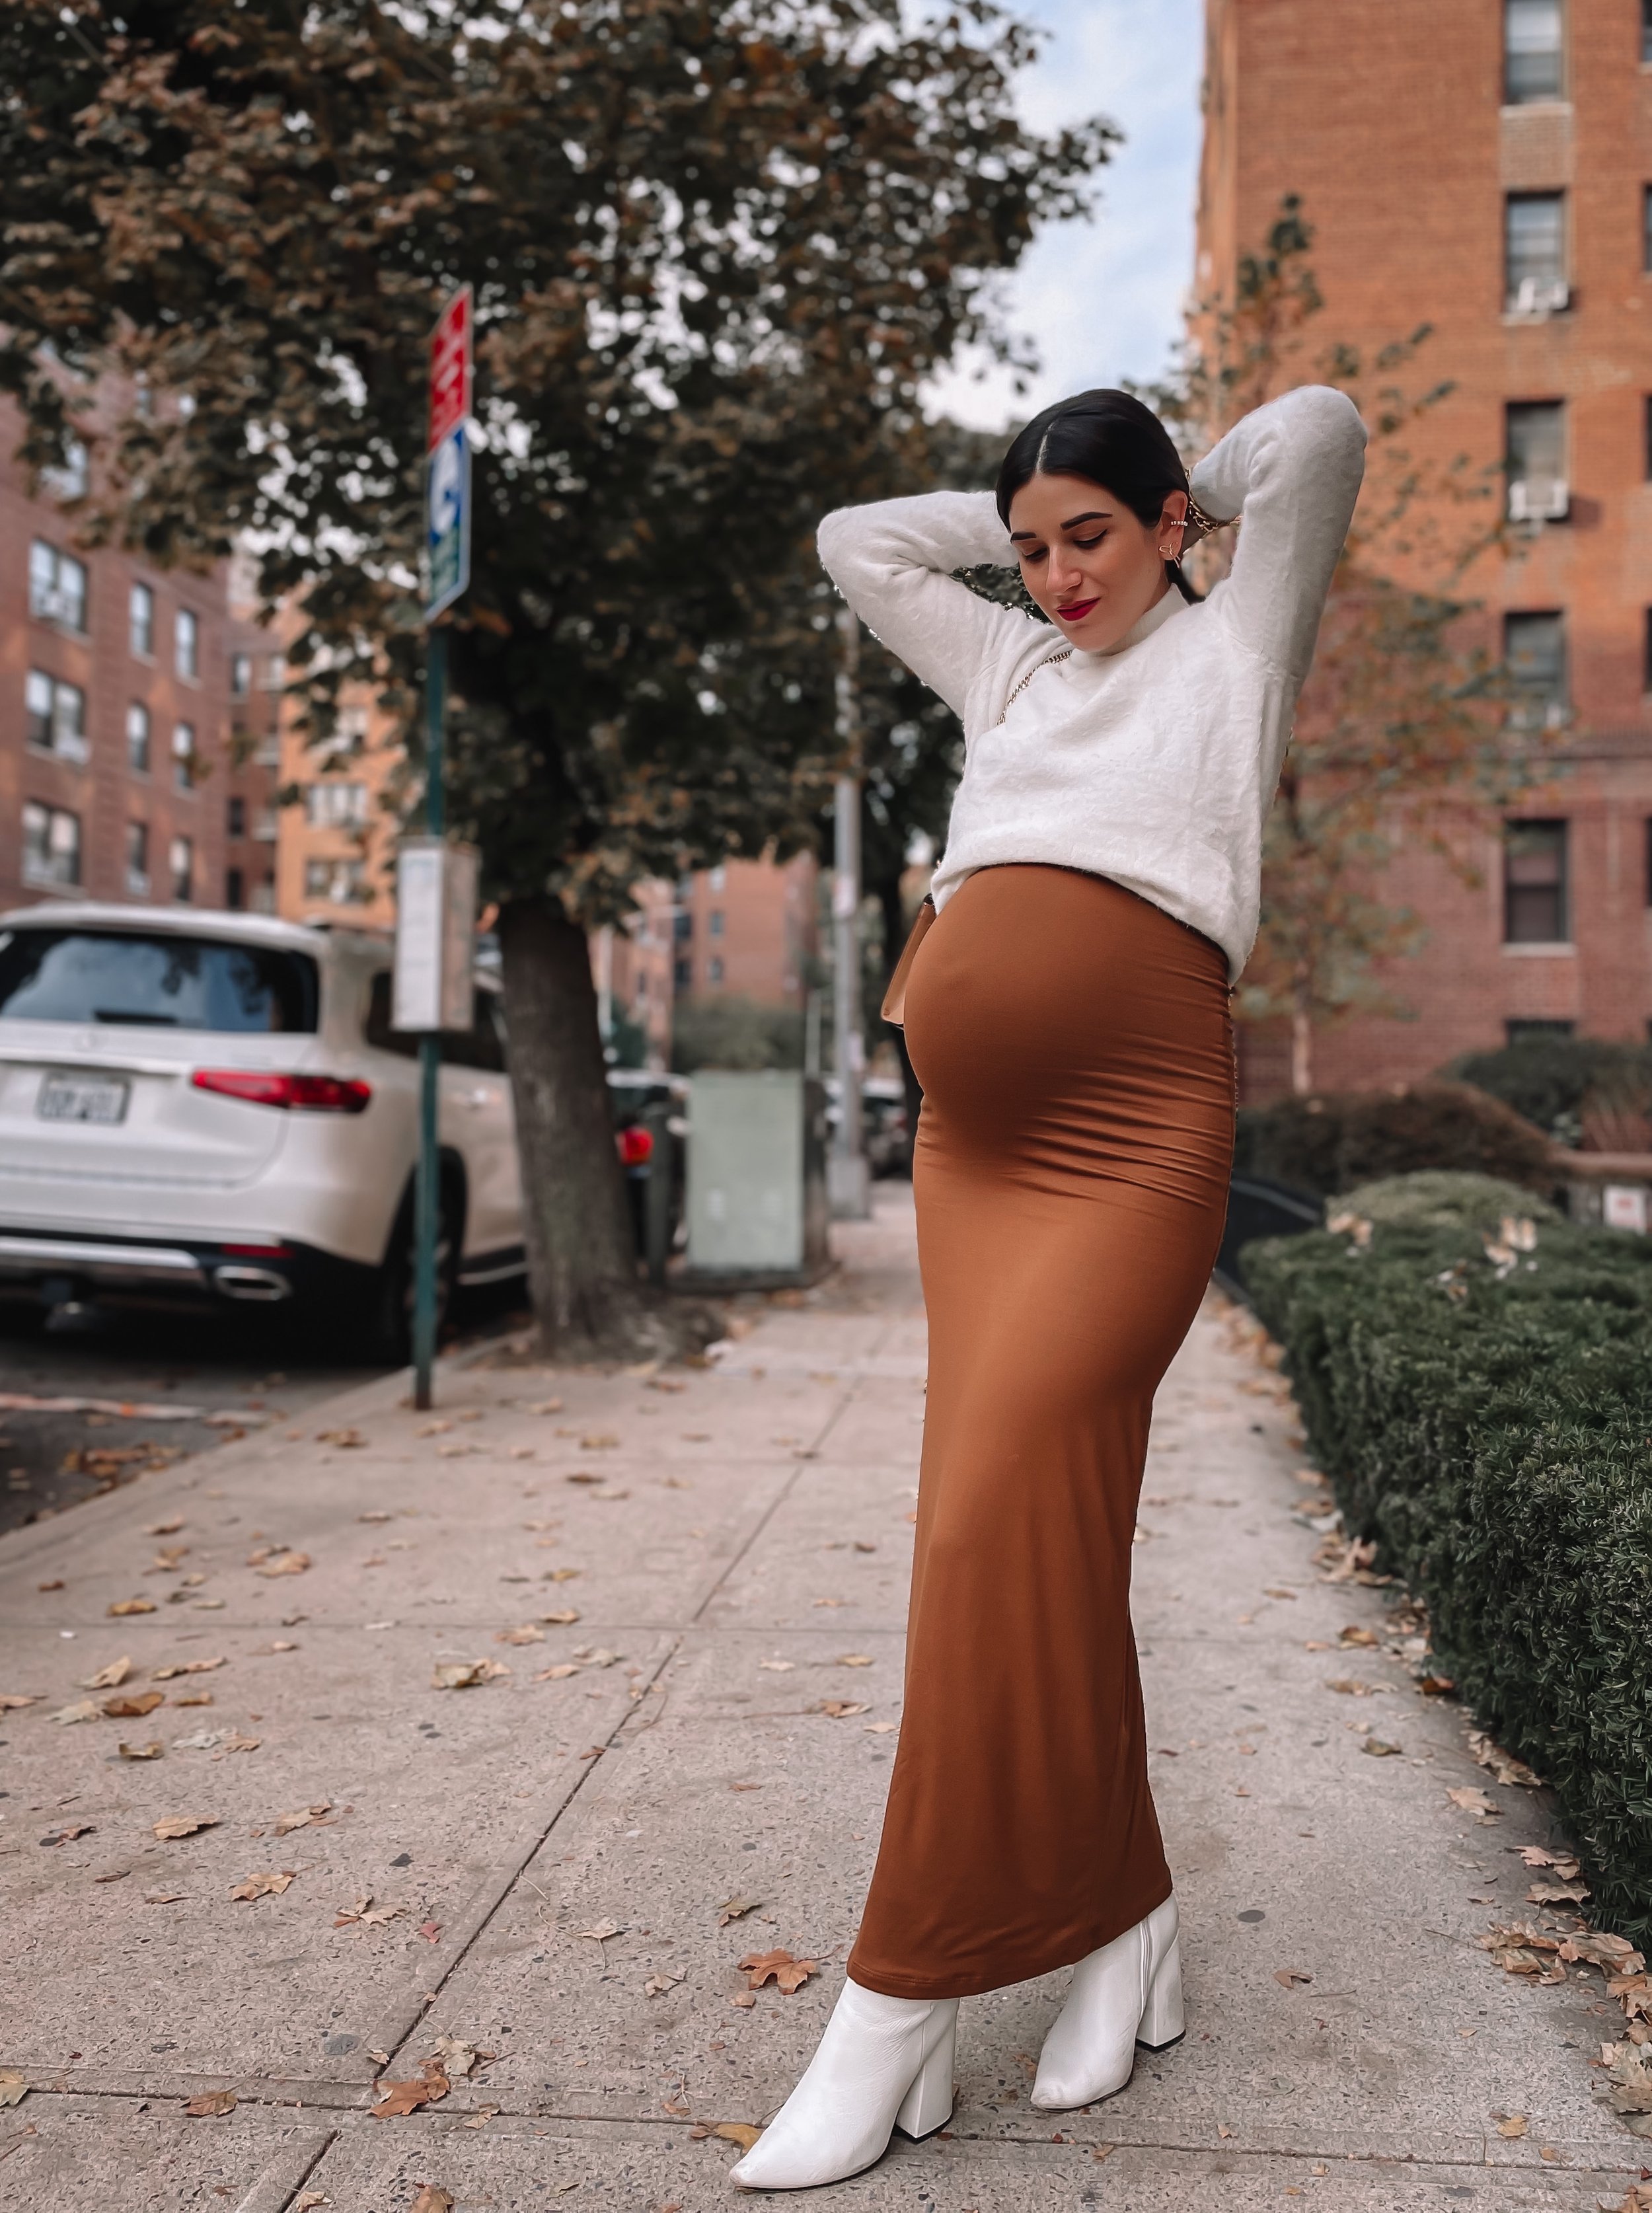 Fall Bump Styling 37 Weeks Pregnant Esther Santer NYC Street Style Blogger Bumpsuit The Jane Dress Toffee White Booties Mango Sweater What to Wear How To Style Bumpdate Women Girl OOTD Maternity Belly Tripod Photoshoot Due Date Epecting First Time Mom.JPG